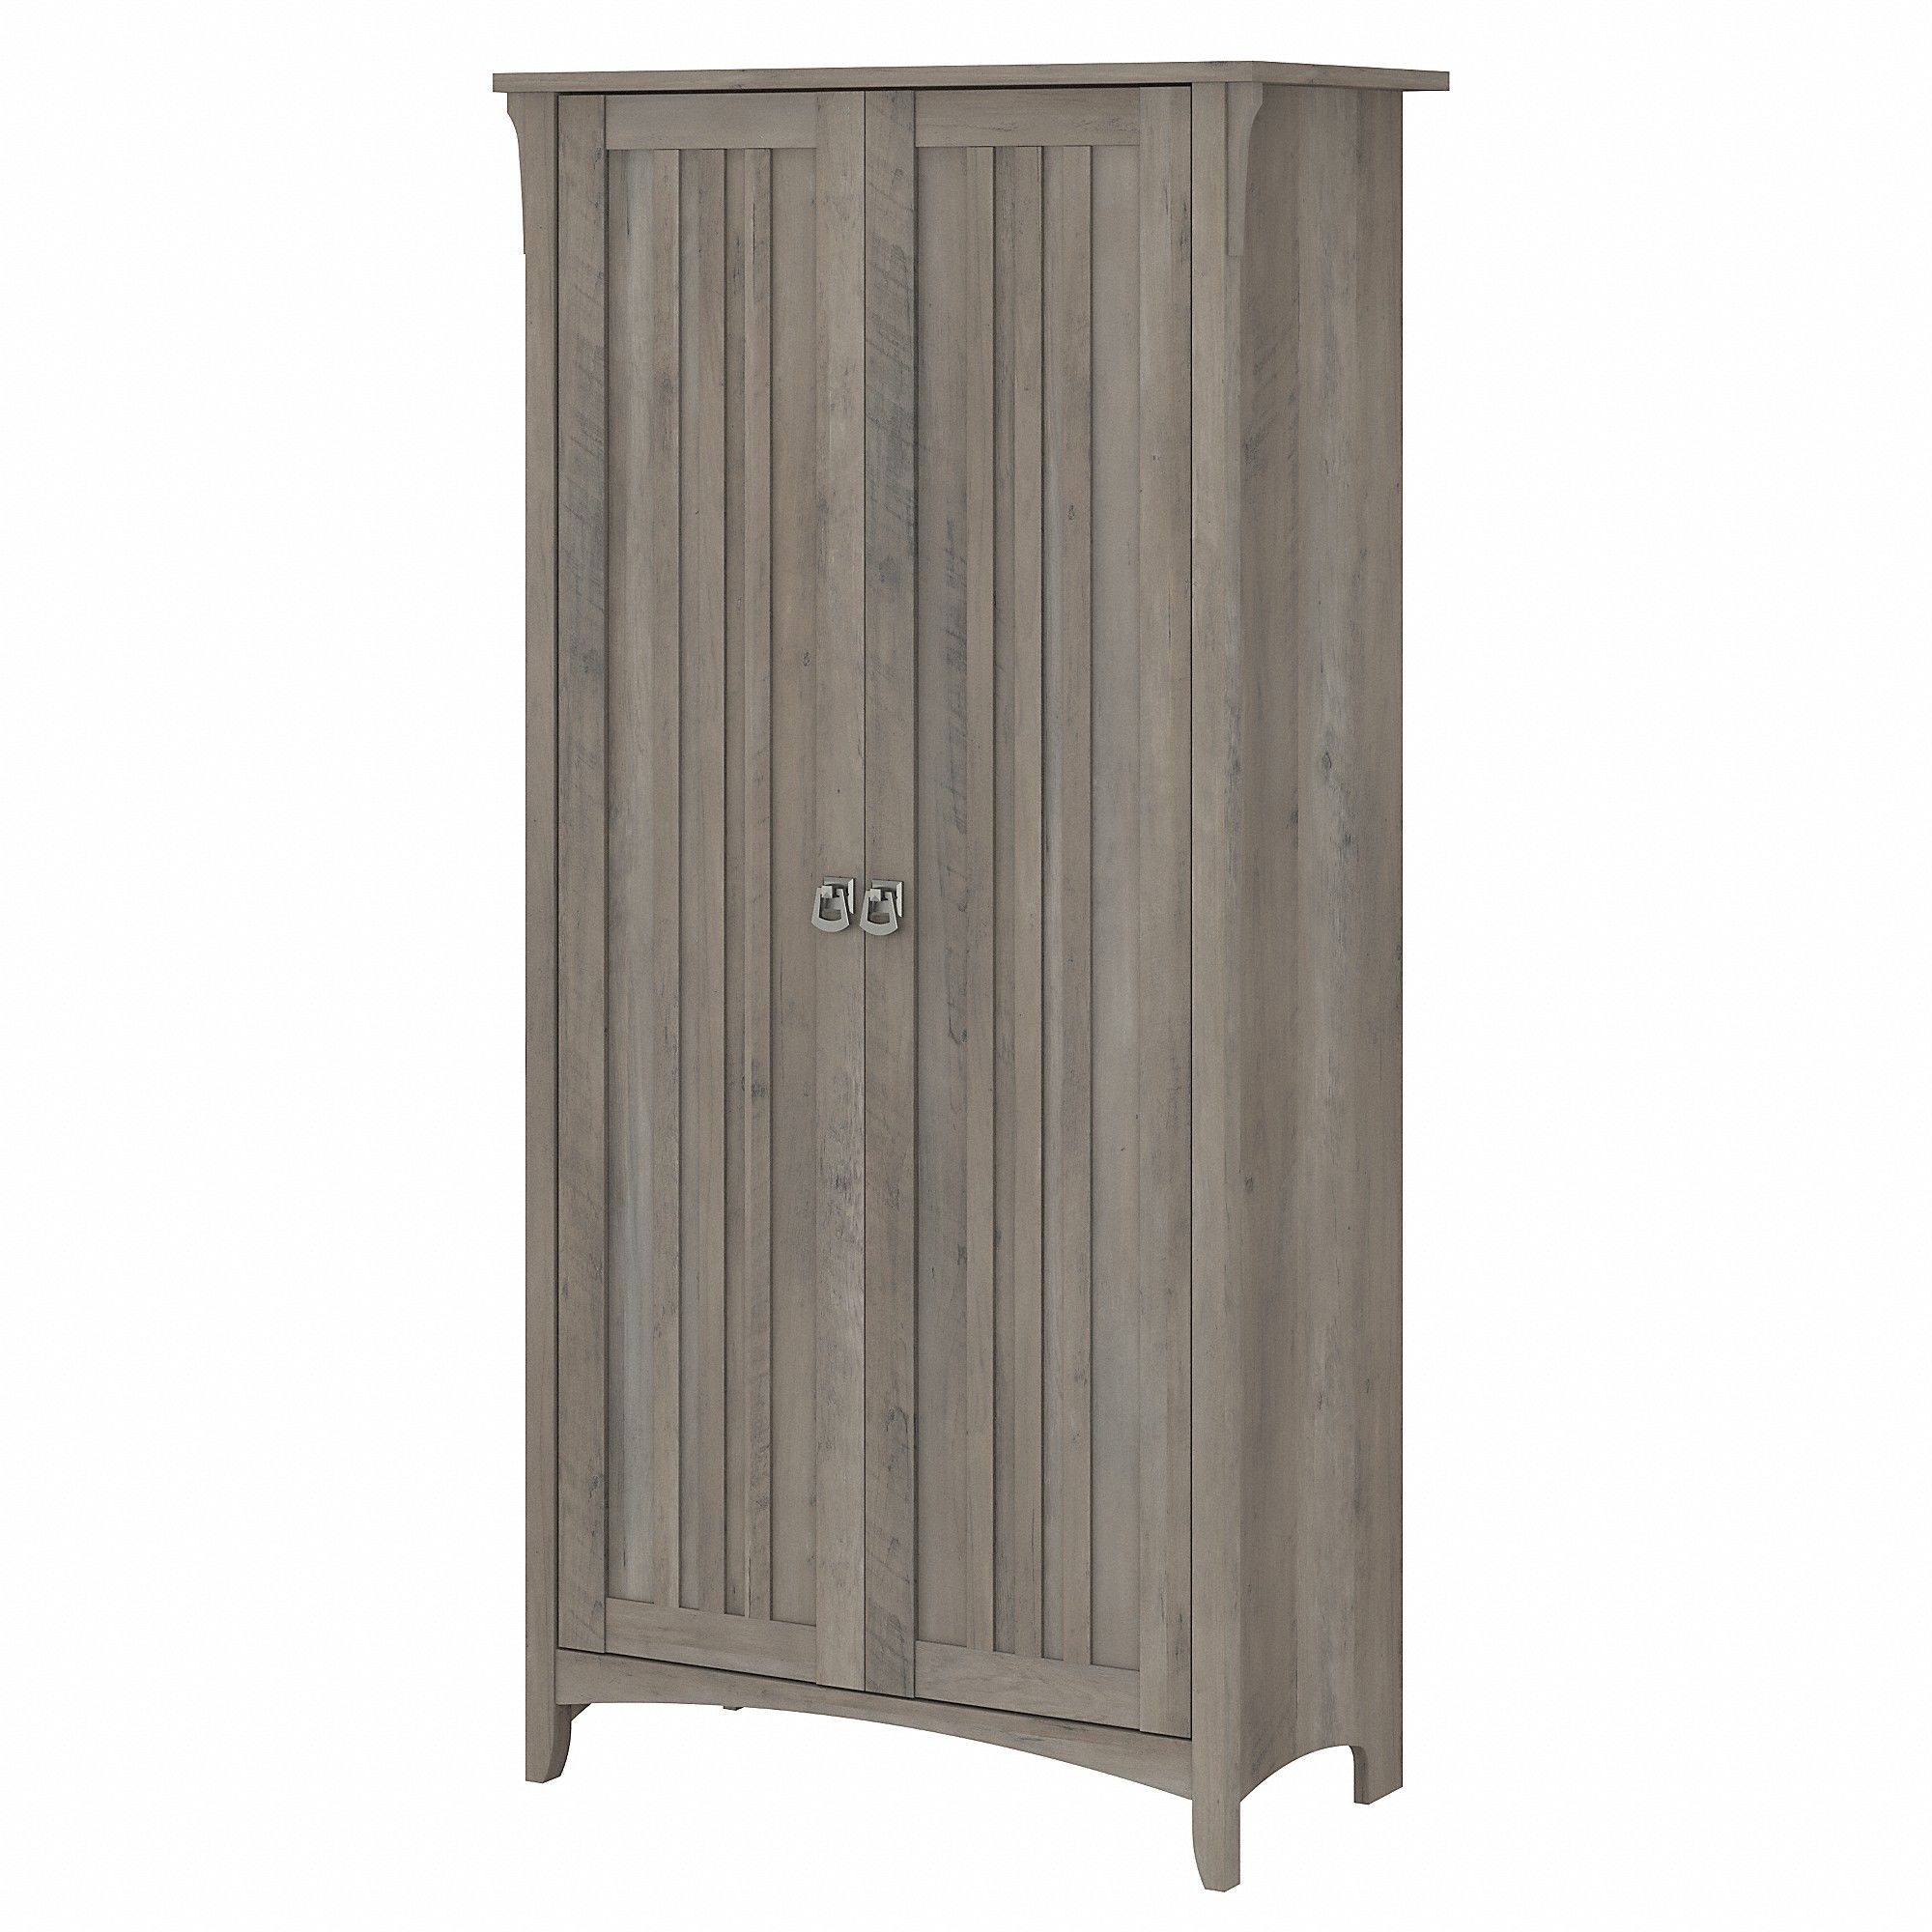 Bush Furniture Salinas Kitchen Pantry Cabinet with Doors in Driftwood Gray